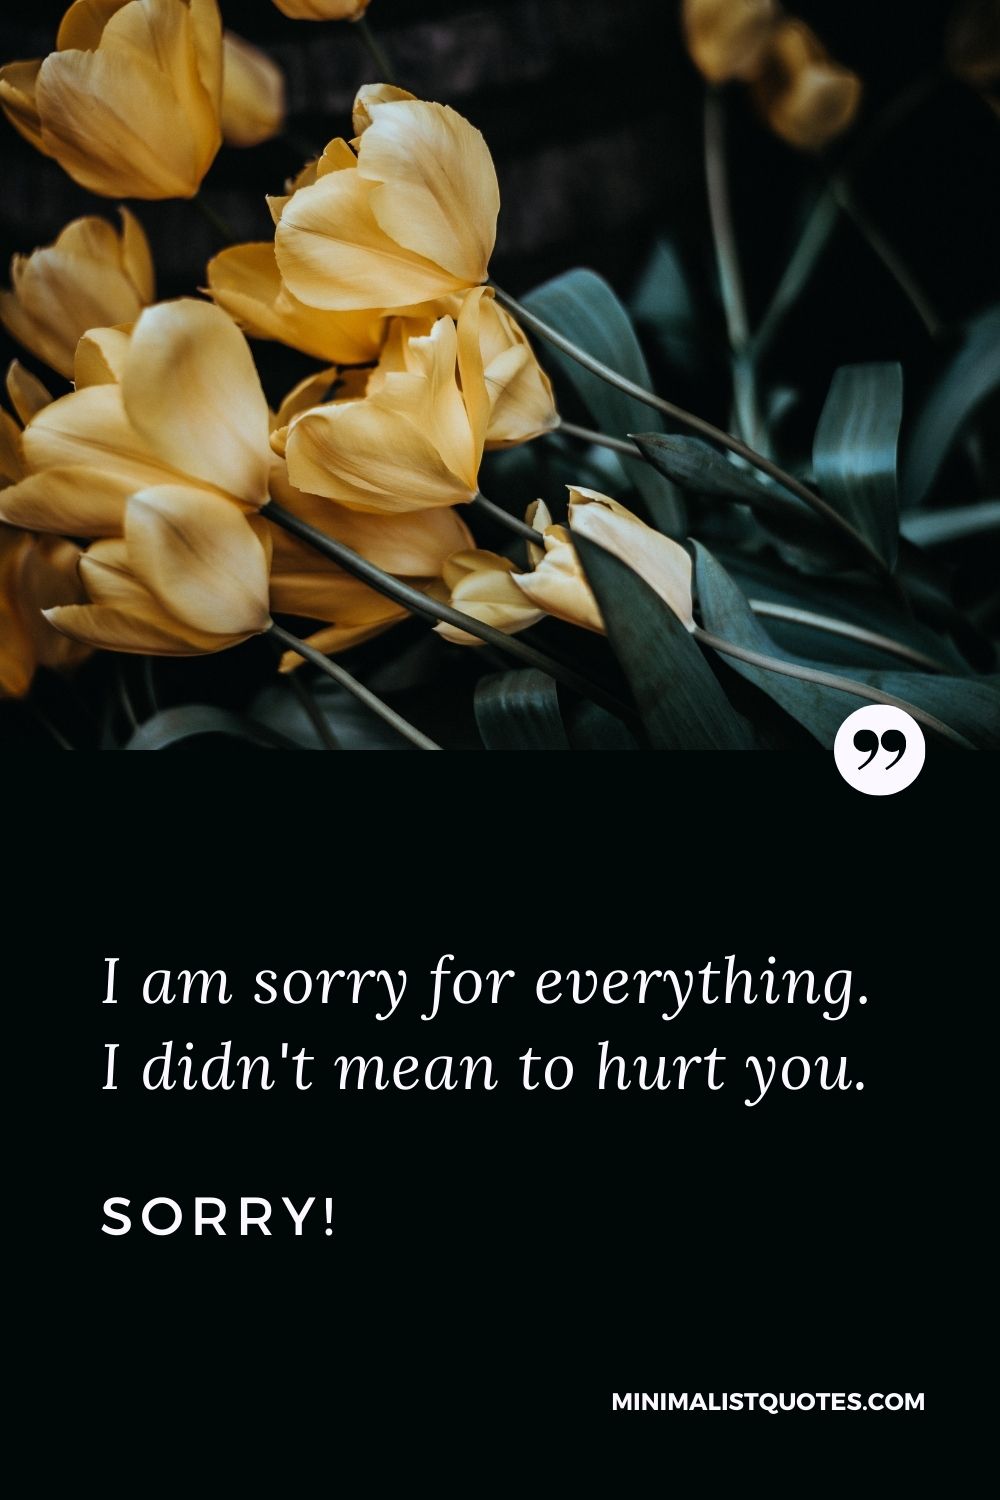 Sorry Quote & message With Image: I am sorry for everything. I didn't mean to hurt you. Sorry!